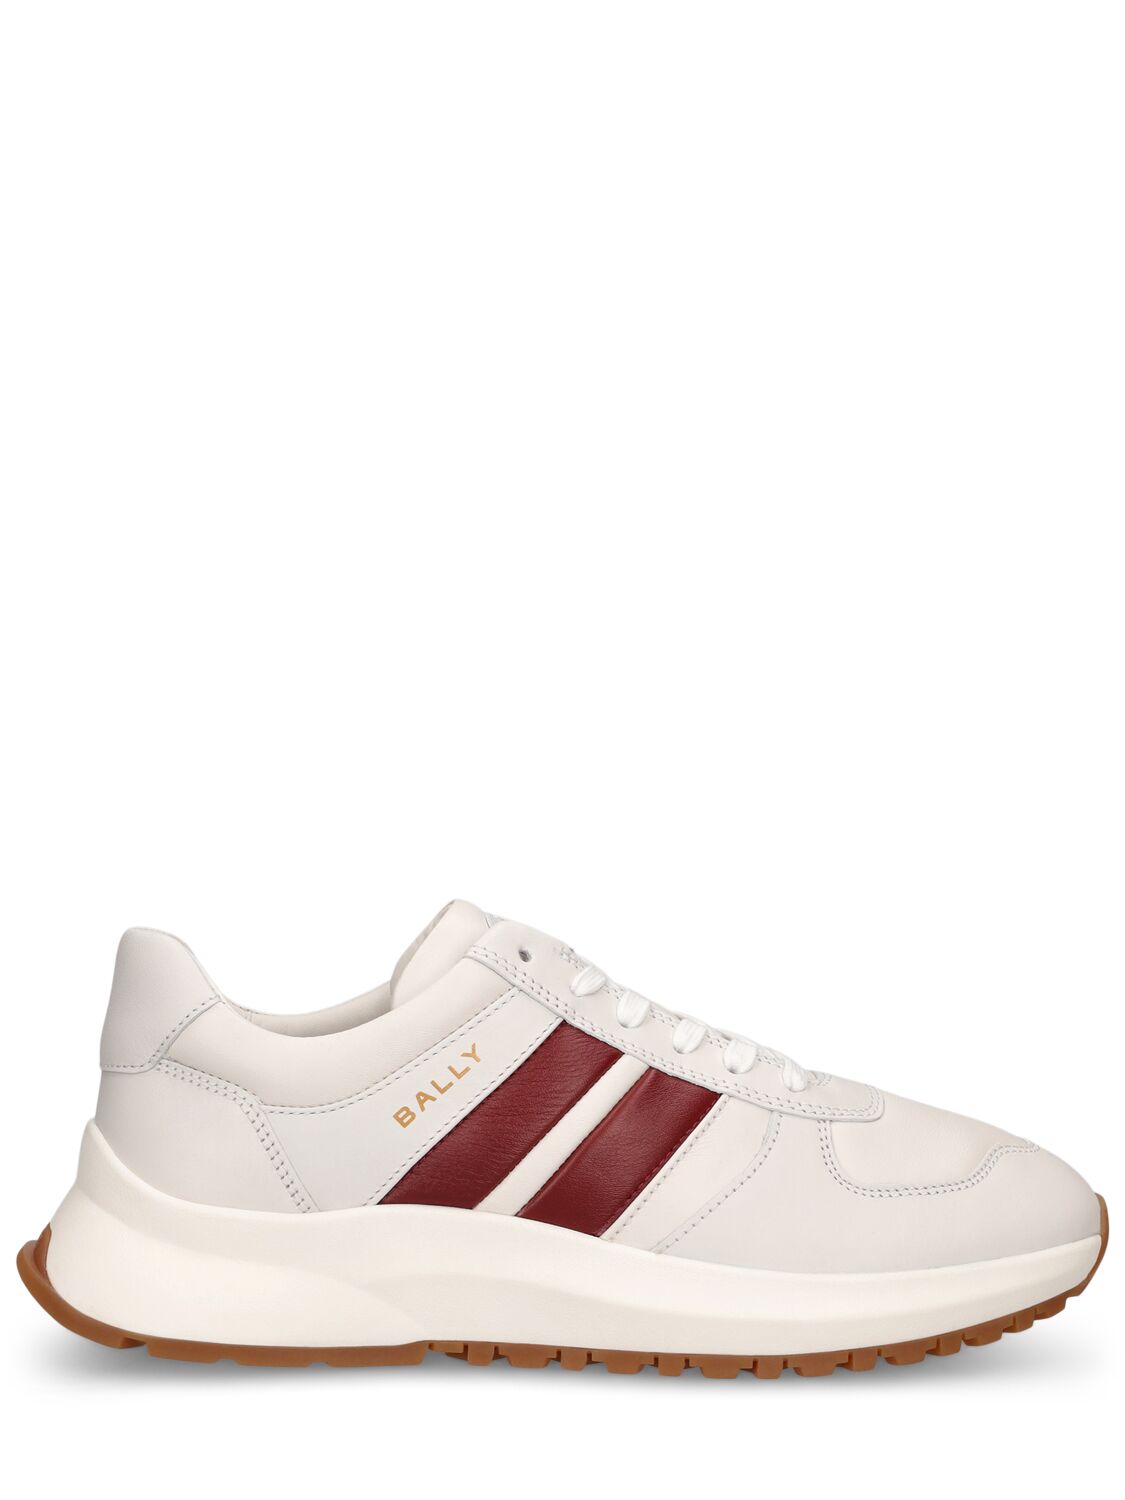 Bally Darsyl Leather Low Sneakers In White,red